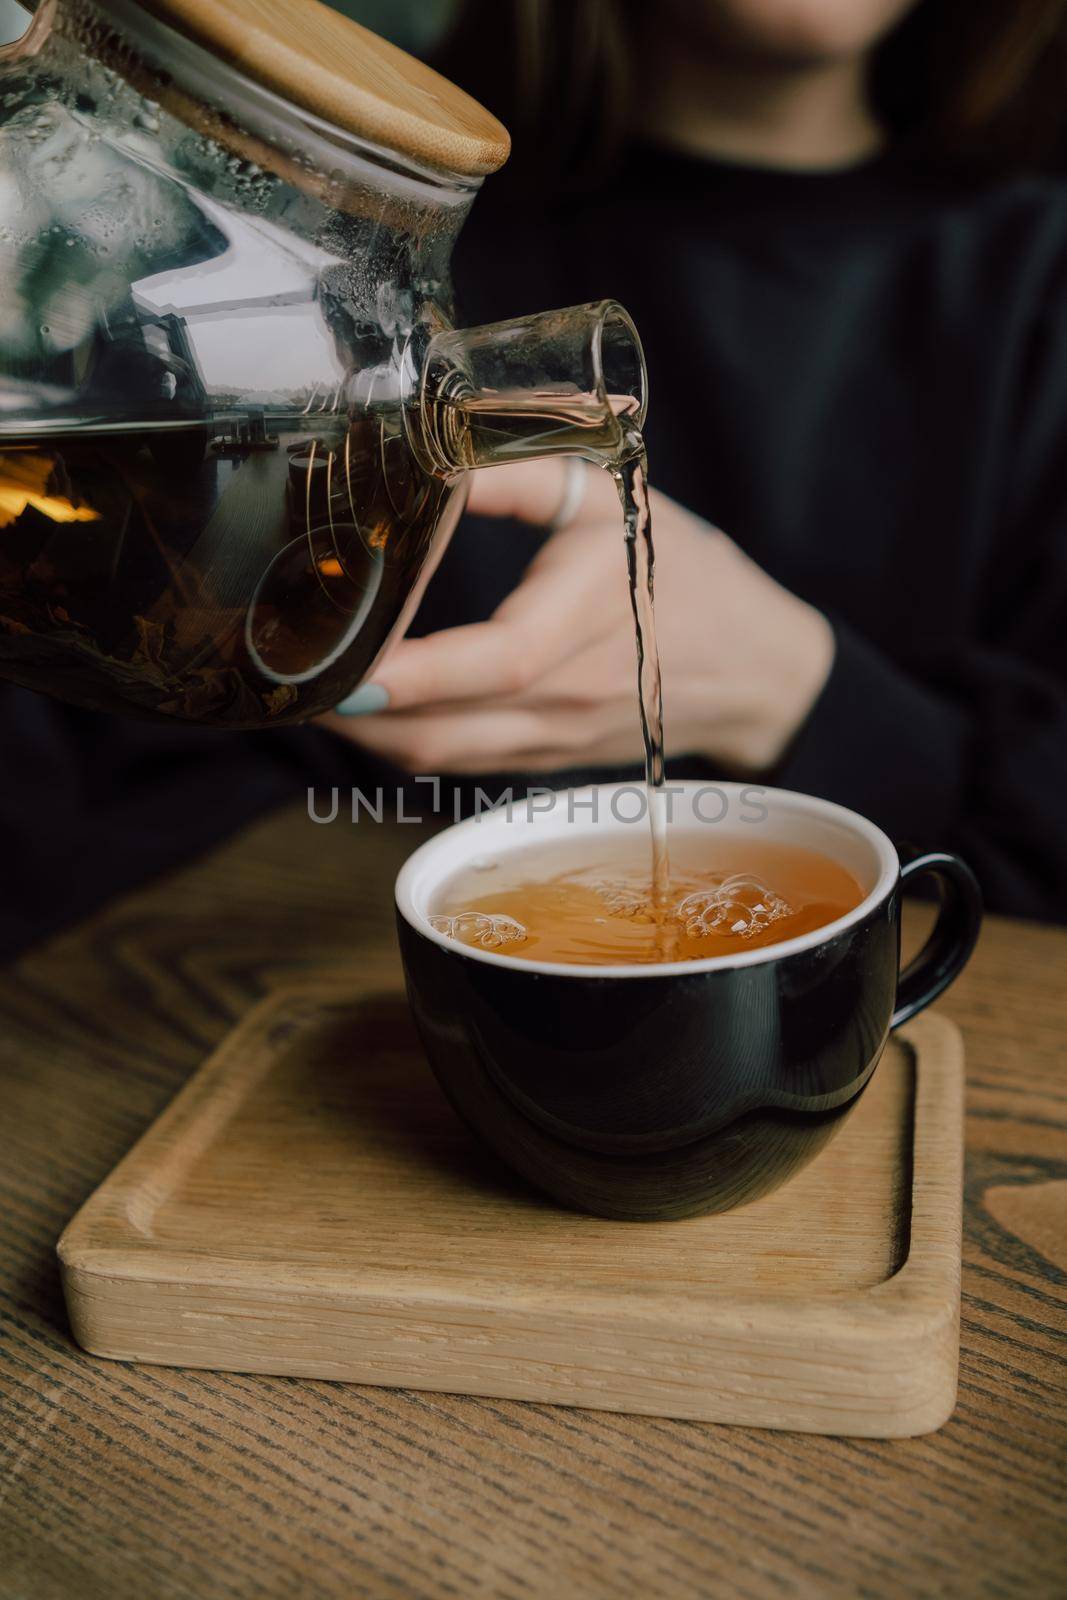 Young woman in cafe during quarantine. Girl pouring some tea from teapot into white cup. Beautiful woman in green sweater smile. Alone in kitchen.